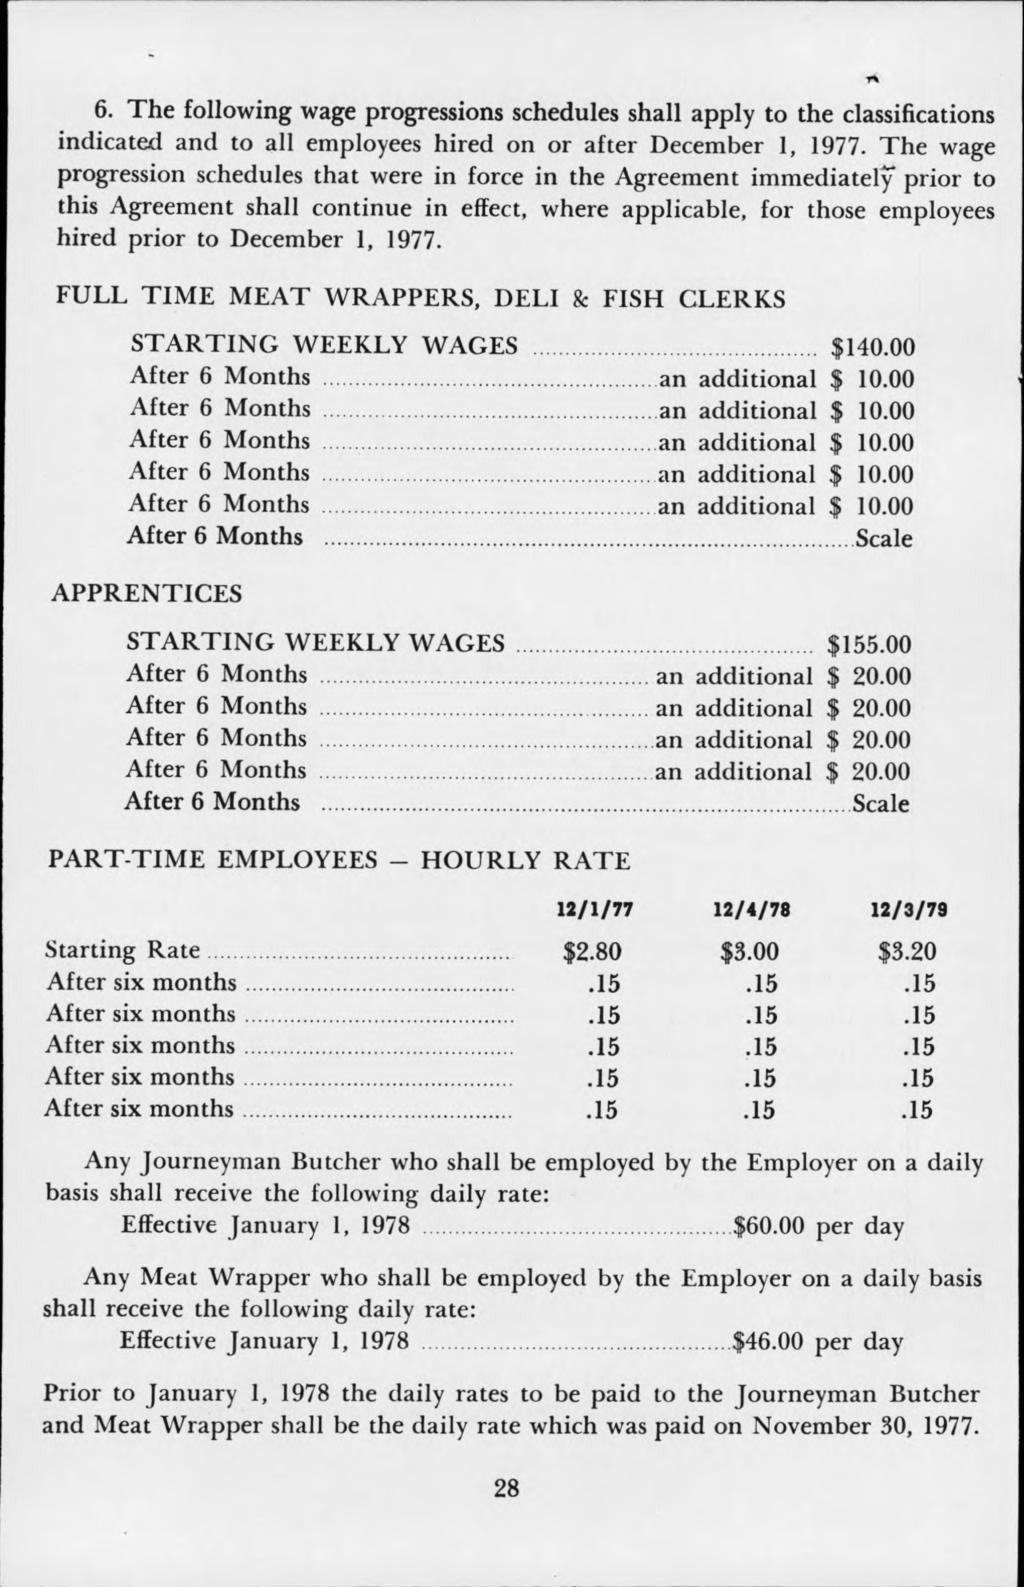 6. The following wage progressions schedules shall apply to the classification indicated and to all employees hired on or after December 1, 1977.